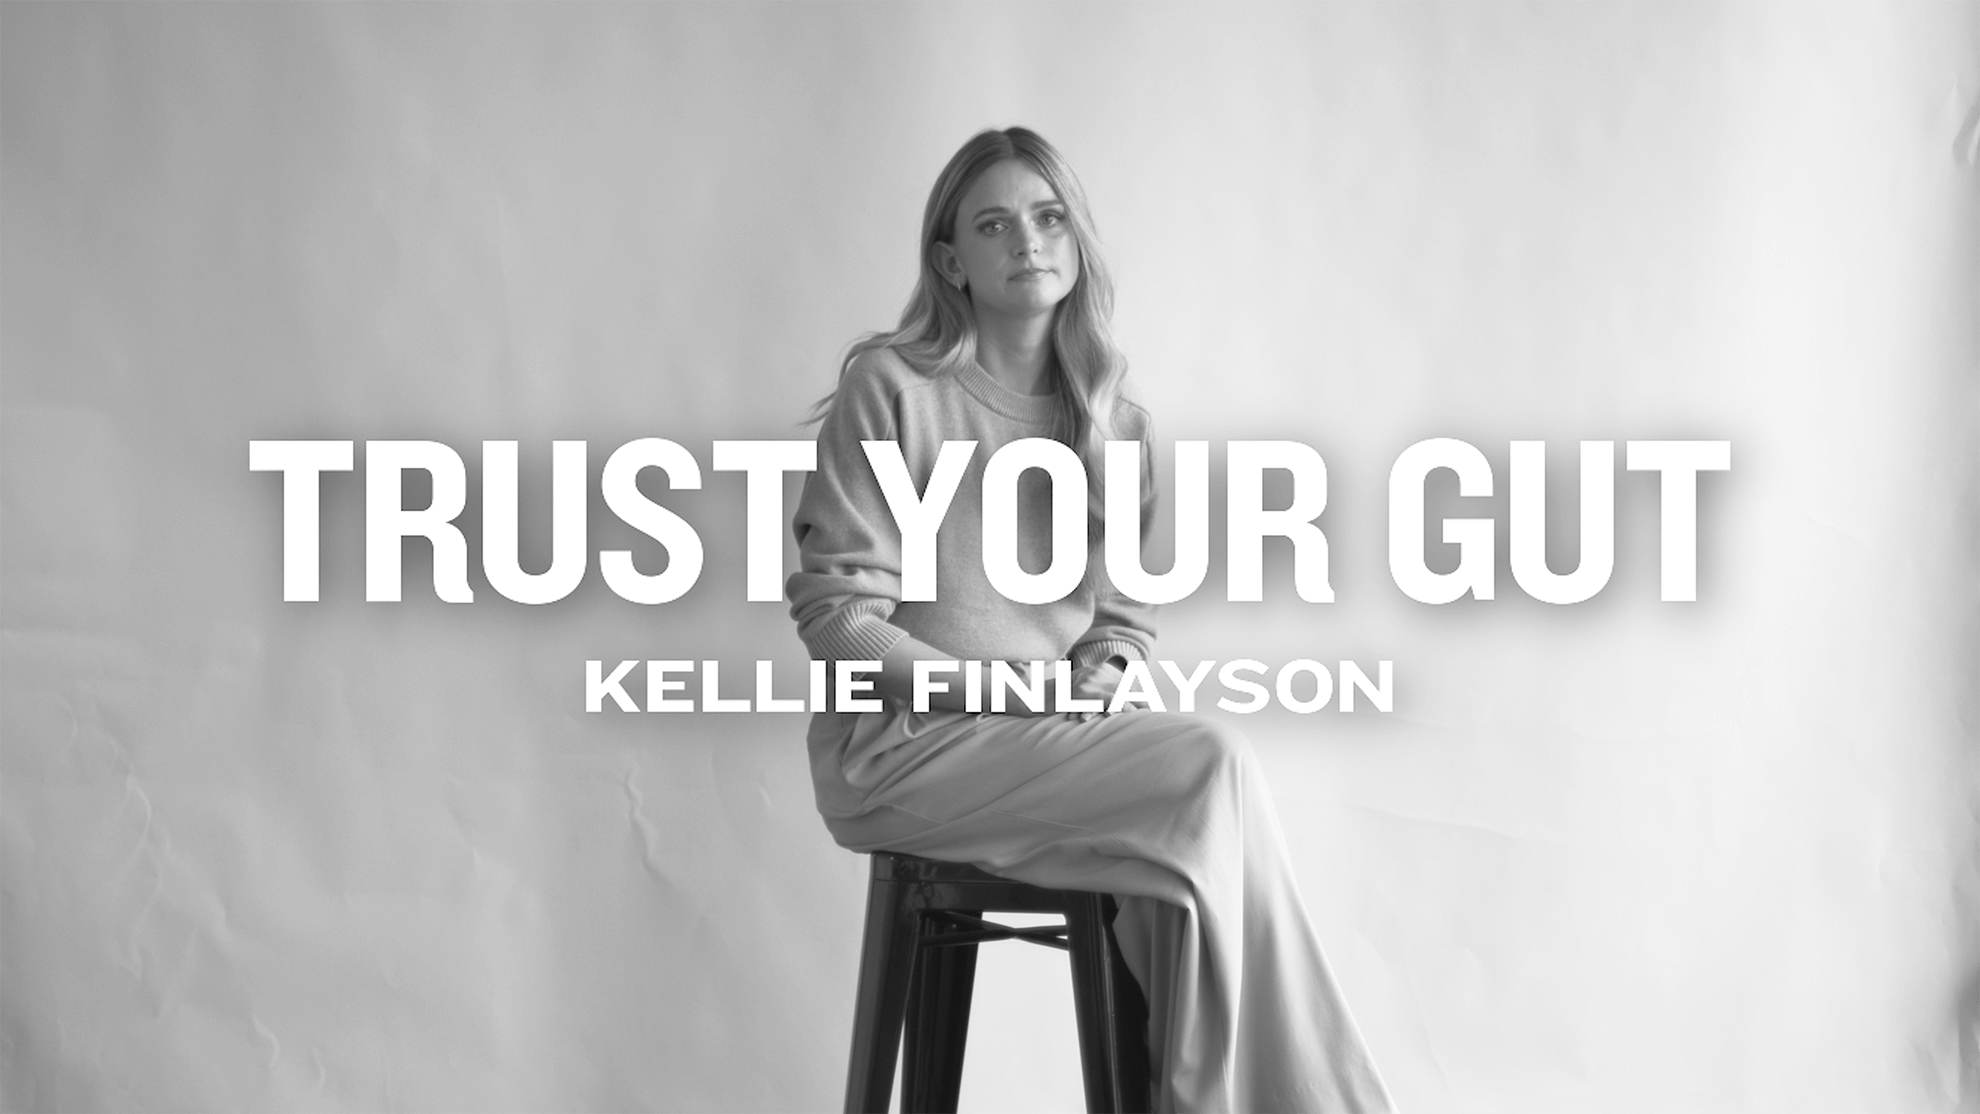 Trust your gut with Kellie Finlayson